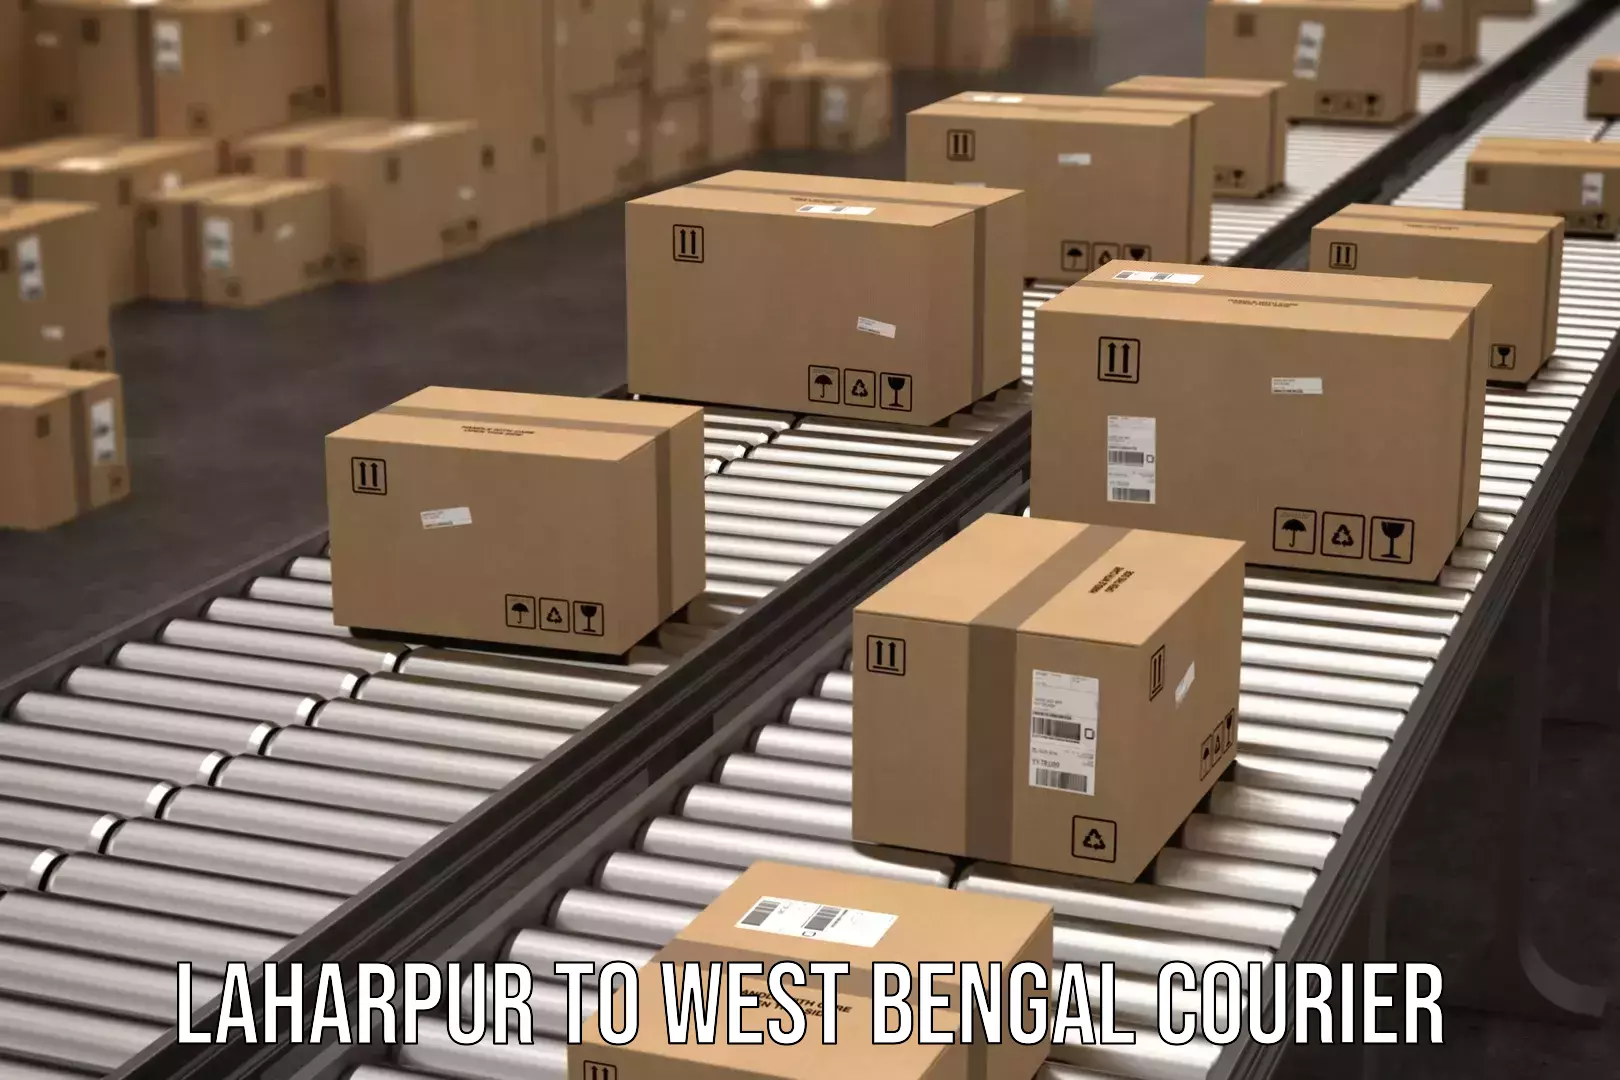 24/7 shipping services Laharpur to West Bengal